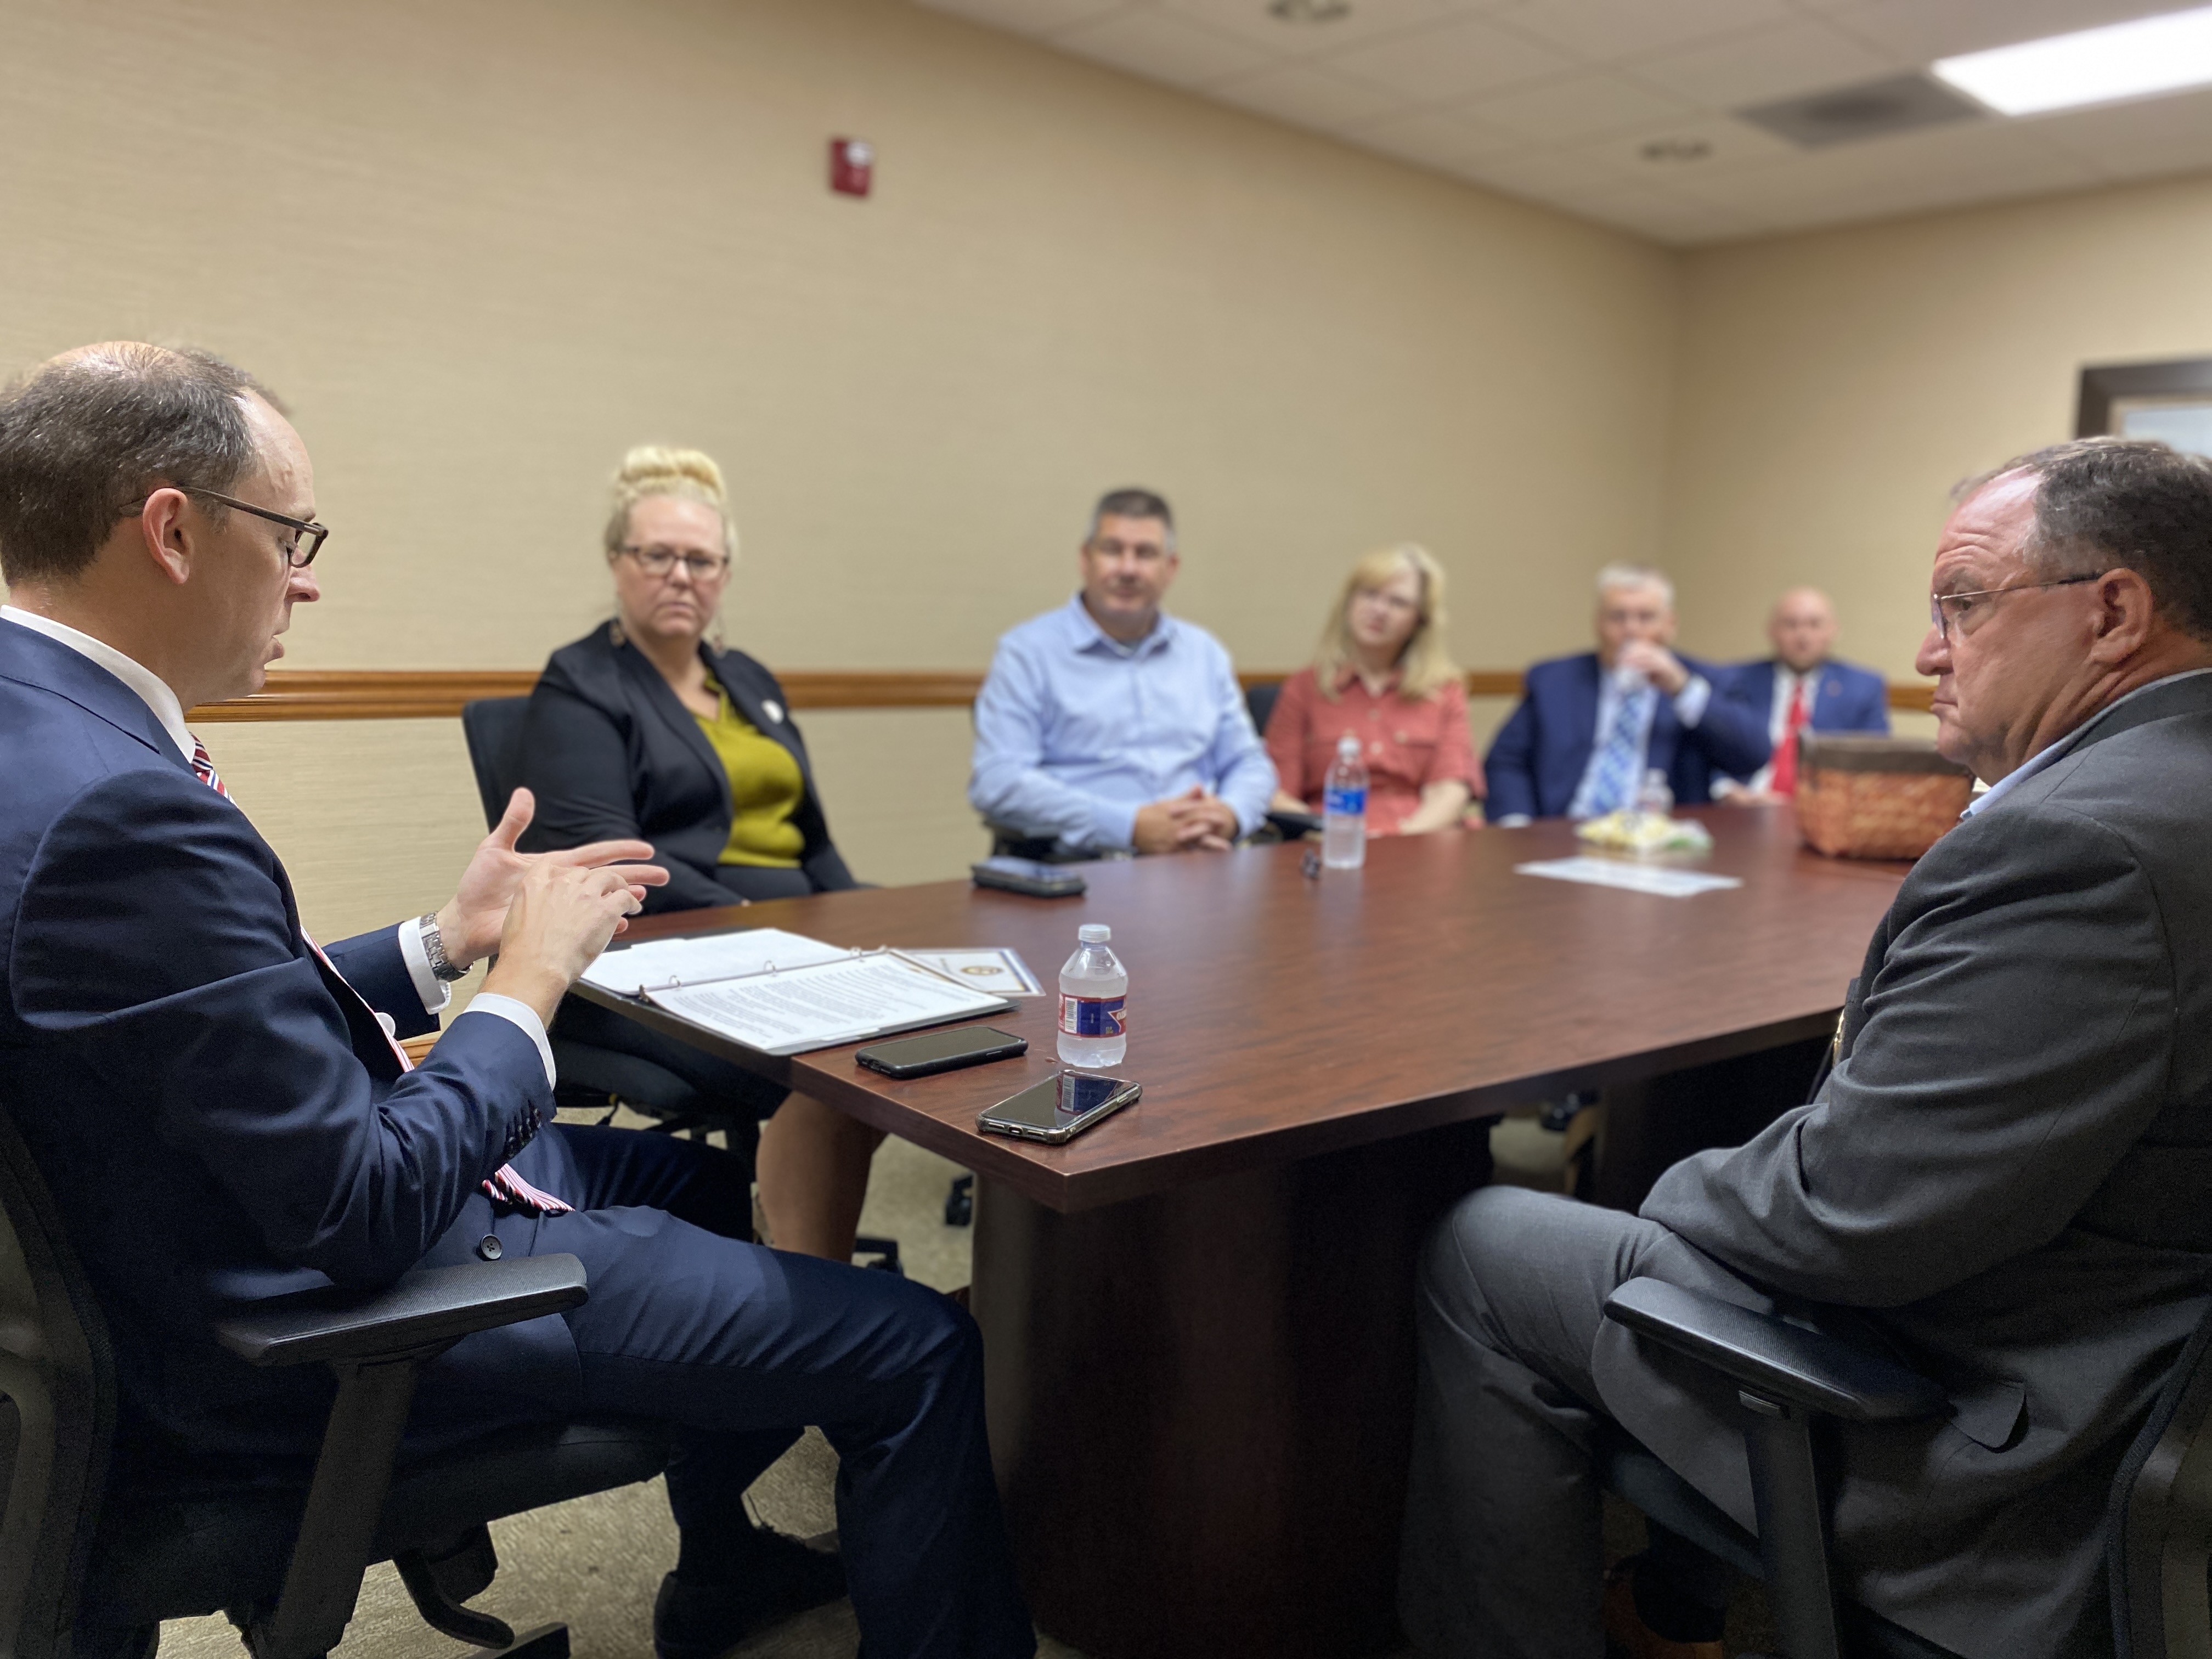 U.S. Attorney Ritz, along with AUSA Hillary Parham and District Attorney General Danny Goodman, facilitated roundtable discussion with Dyer County law enforcement